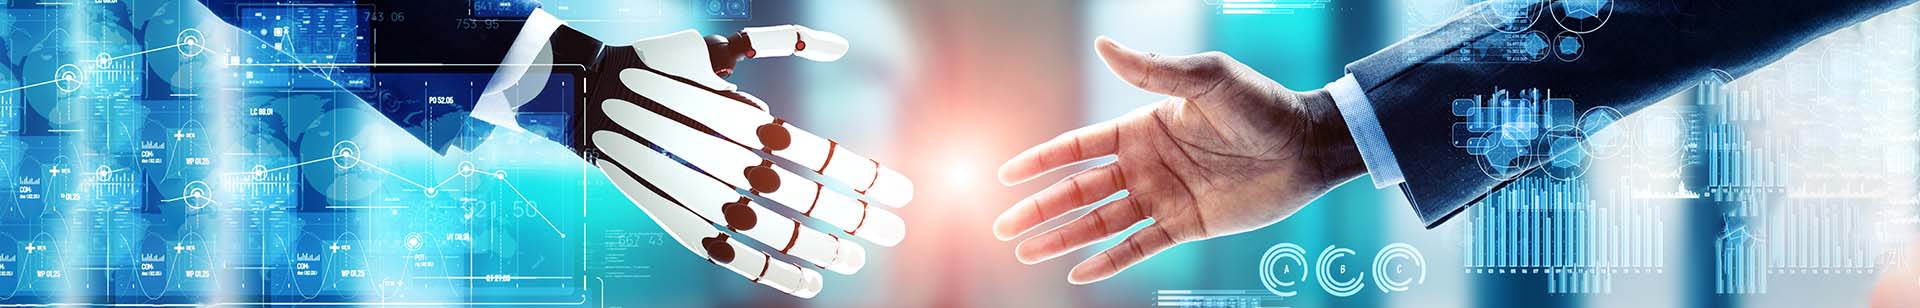 A human and a robot are reaching to shake hands in front of an orange light and light-blue background.